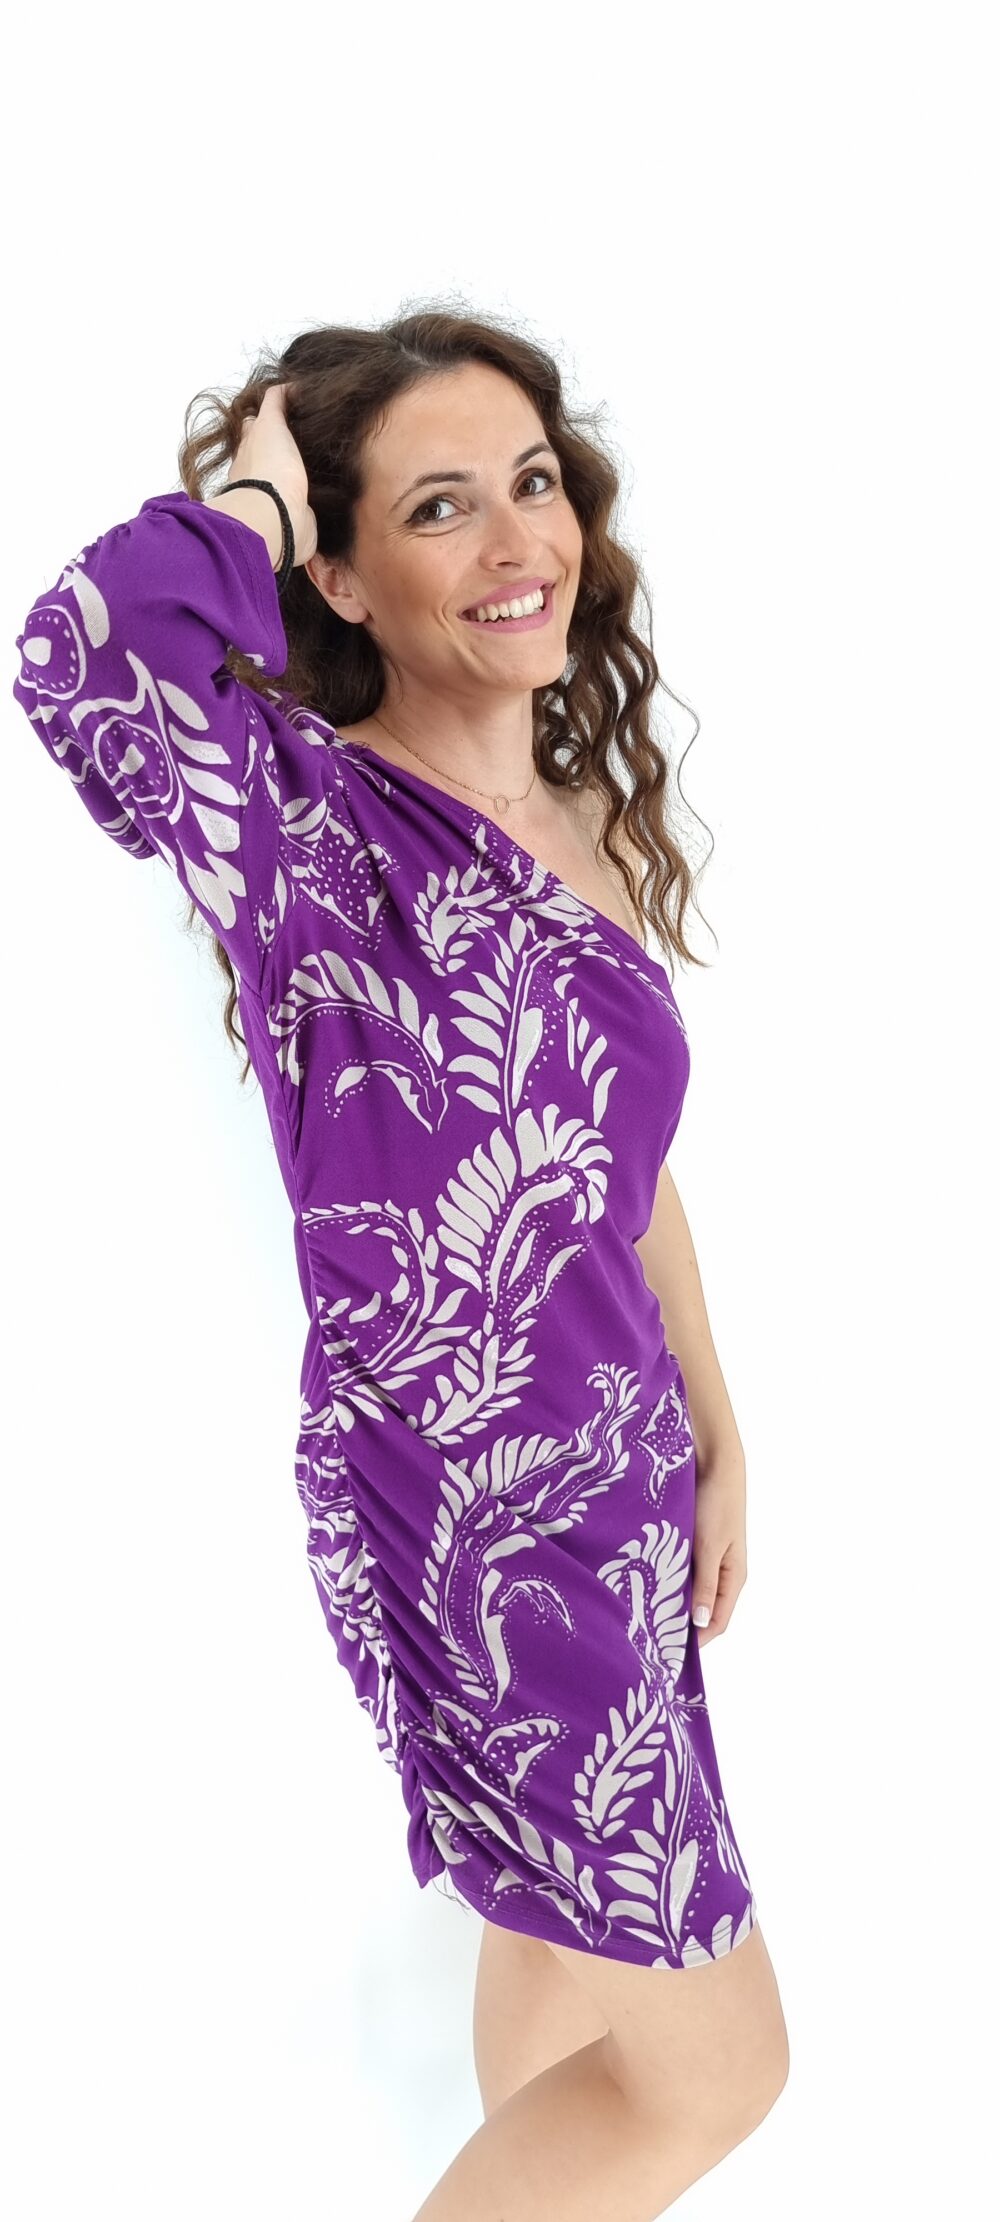 Short dress with a sleeve and white designs purple